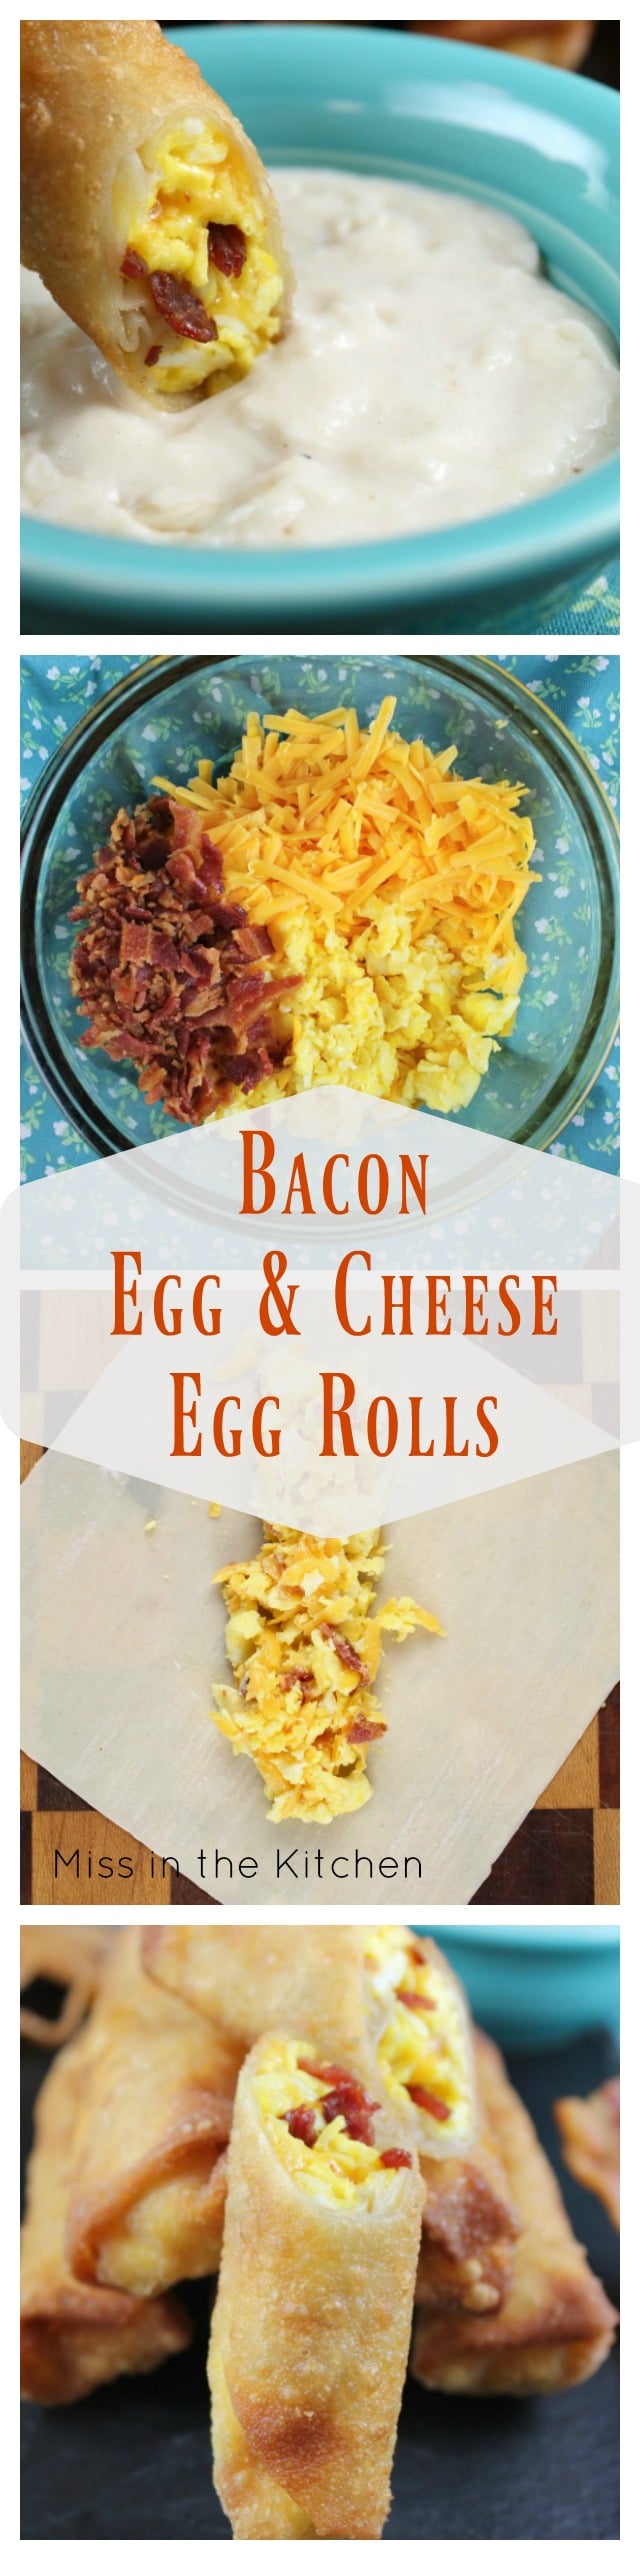 Bacon Egg and Cheese Egg Rolls Recipe ~ Perfect Make Ahead Breakfast from MissintheKitchen.com